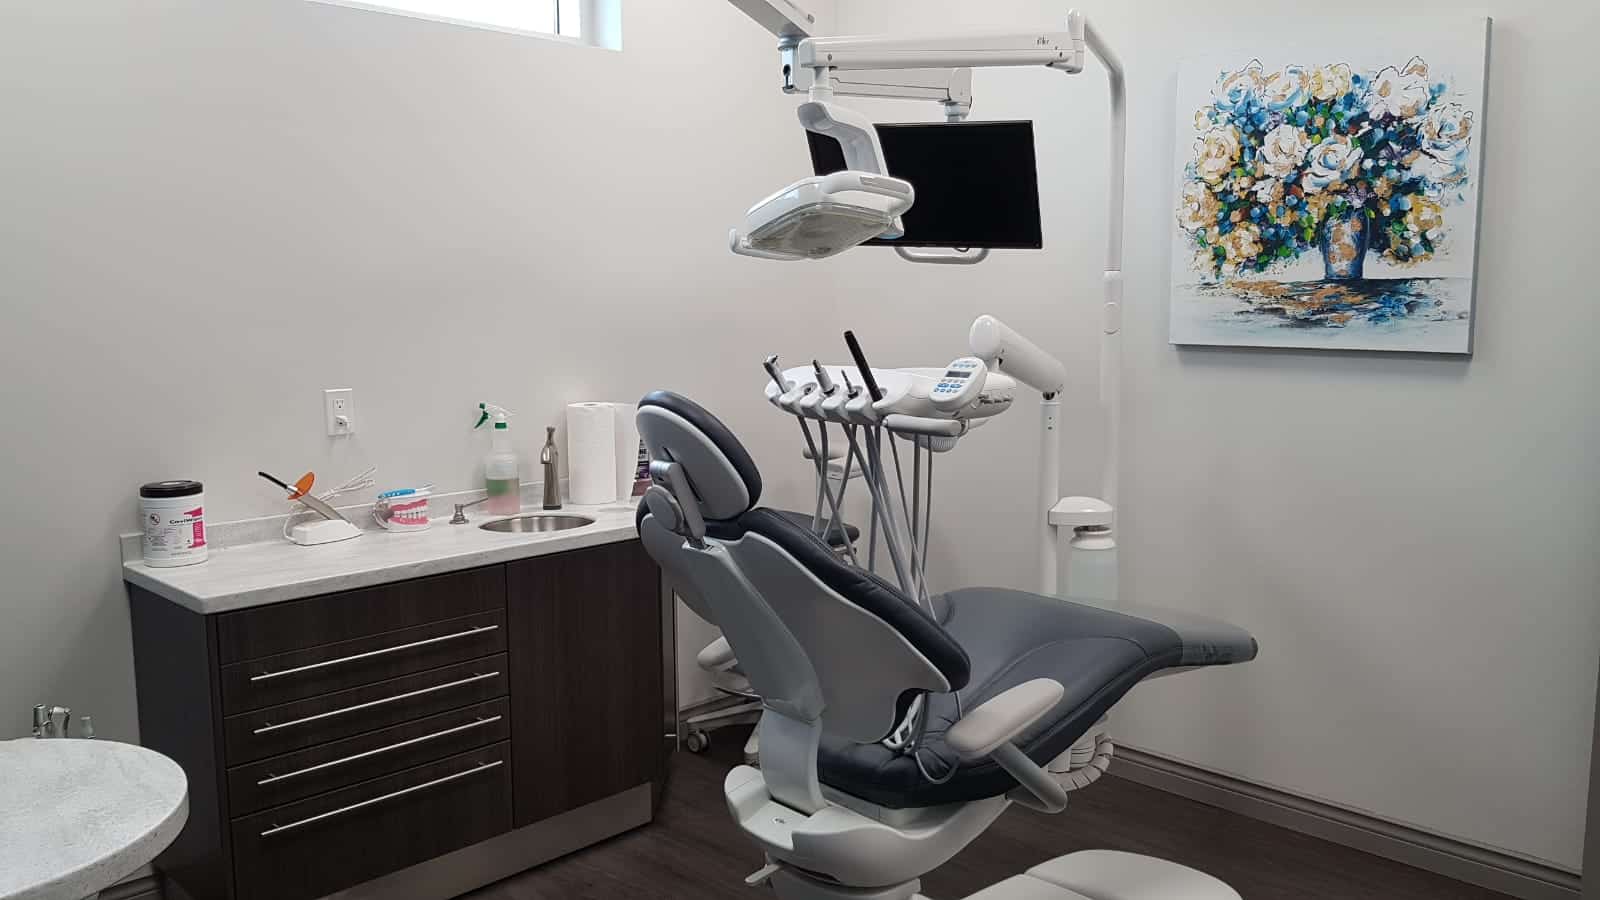 Movable chair for dental treatment along with lights, monitor and other equipment